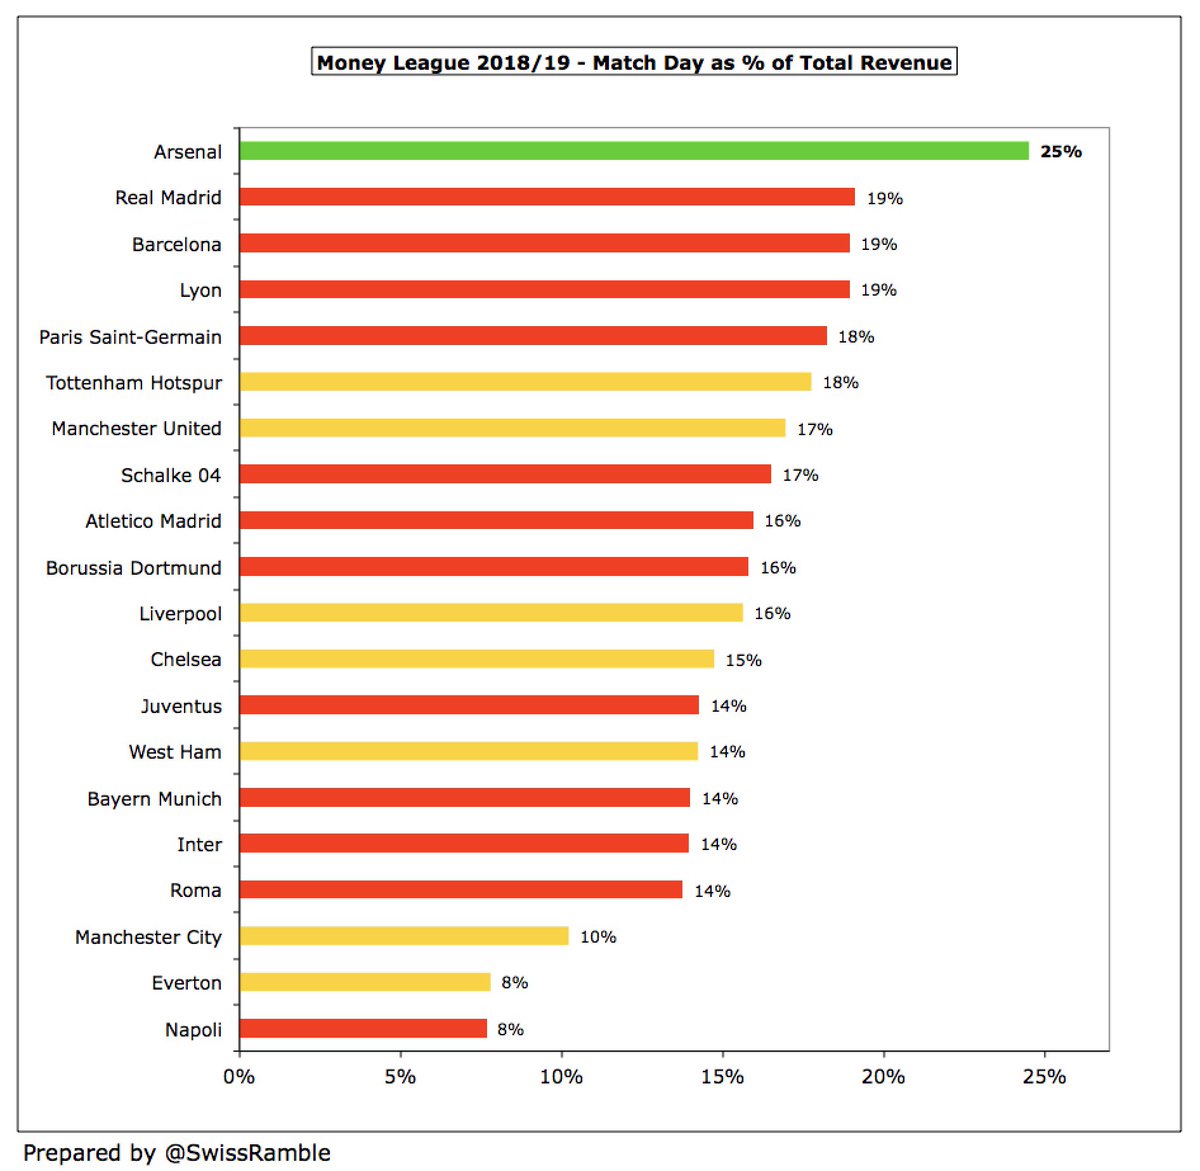 The importance of match day revenue to  #AFC is very clear, as shown by 25% of their total revenue coming from this category, well ahead of Real Madrid, Barcelona and Lyon, all 19%. Could be a big hit of Arsenal fail to qualify for Europe.